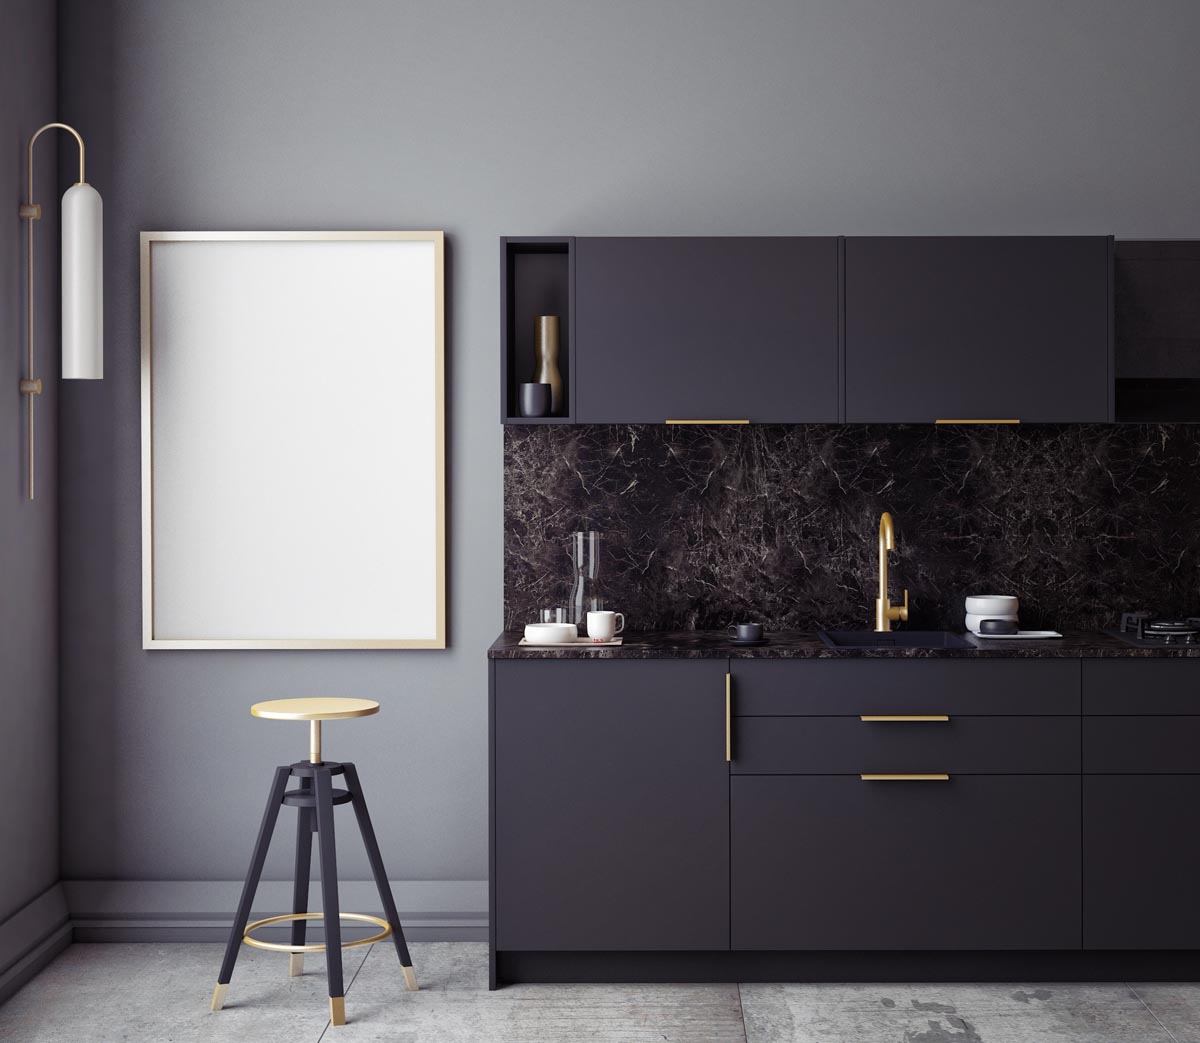 Keeping Your Kitchen Clean with These Six Black-Themed Kitchen Inspiration